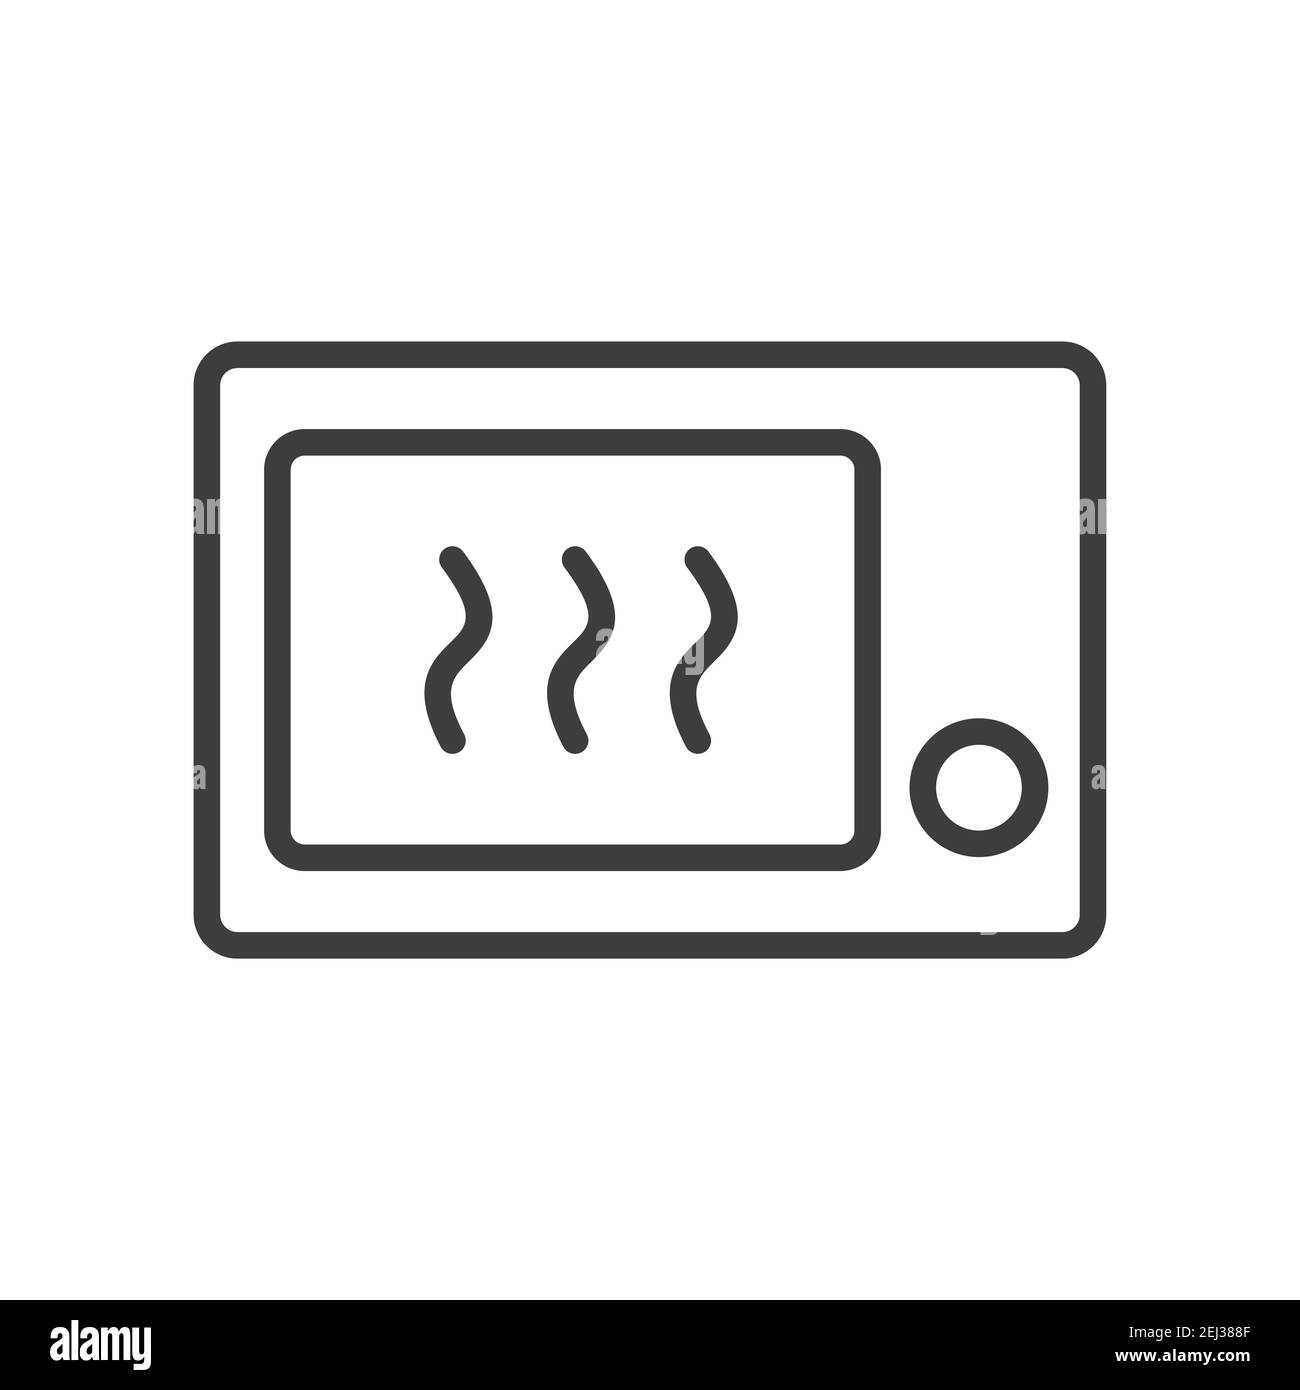 microwave. Simple food icon in trendy line style isolated on white background for web apps and mobile concept. Vector Illustration. EPS10 Stock Vector